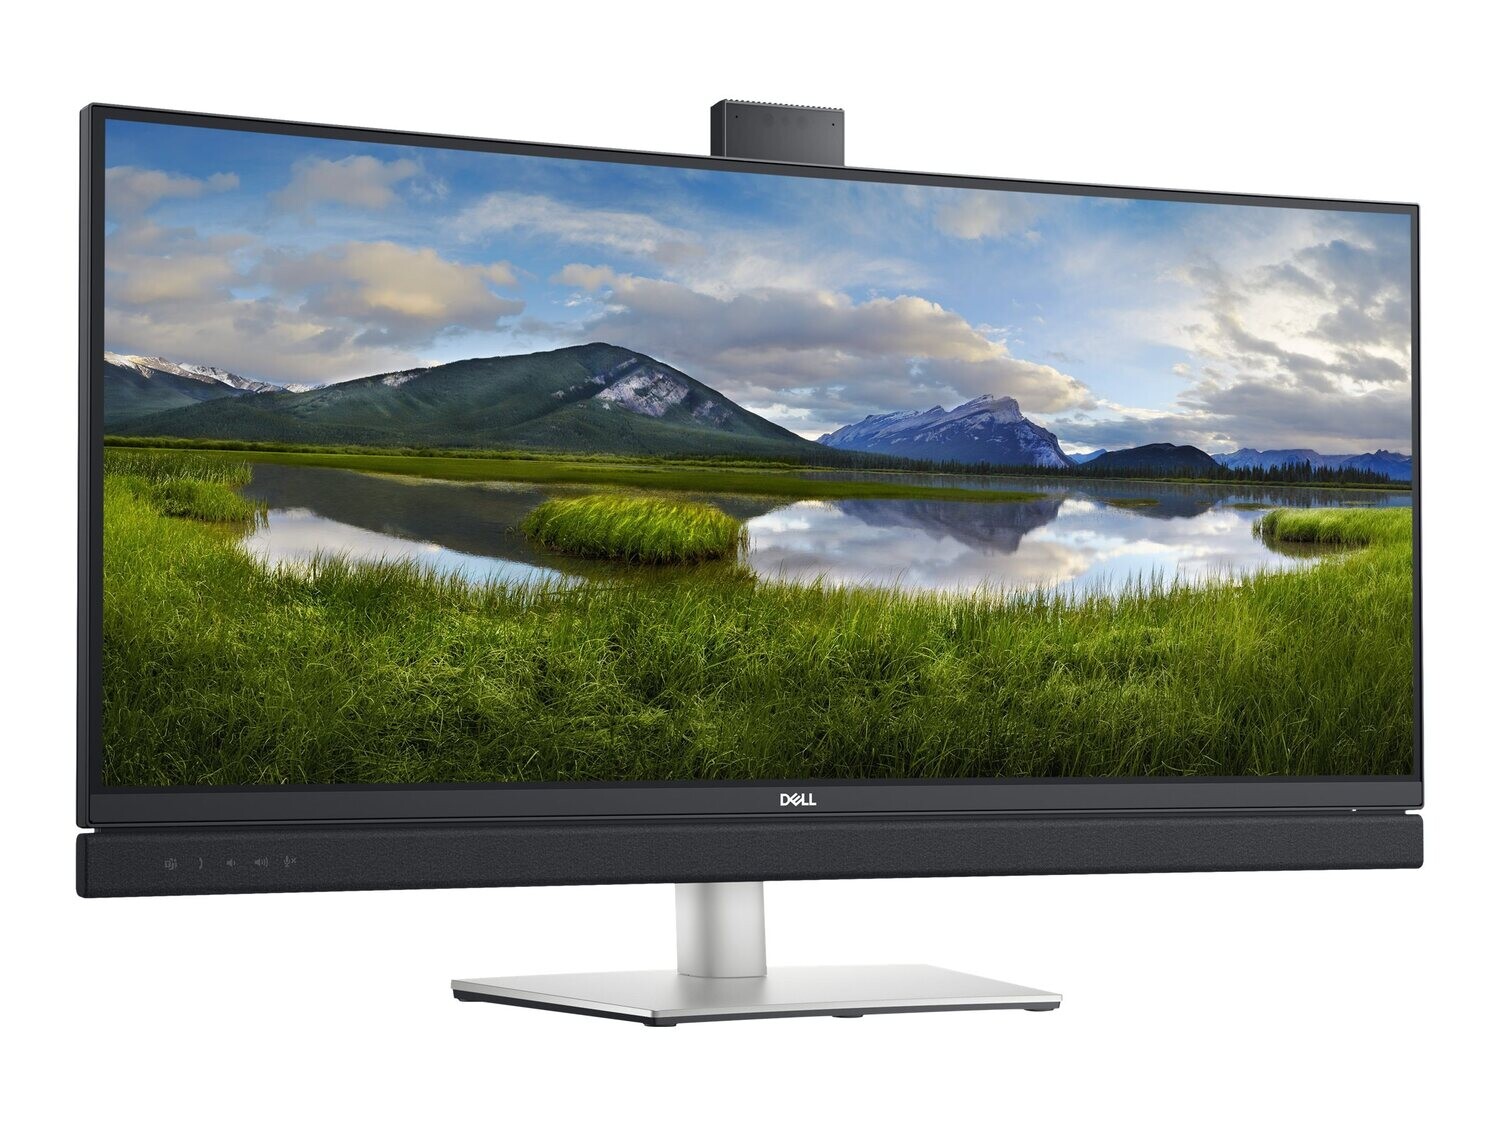 Monitor DELL C3422WE Curved Video Conferencing 34.14in, 3440x1440 WQHD, IPS Antiglare, 21:9, 1000:1, 300 cd/m2, 8ms/5ms, 178/178, DP (HDCP), HDMI, 5x USB 3.2 (DP/Type-B/B.C), Audio line-out, RJ-45, 2x